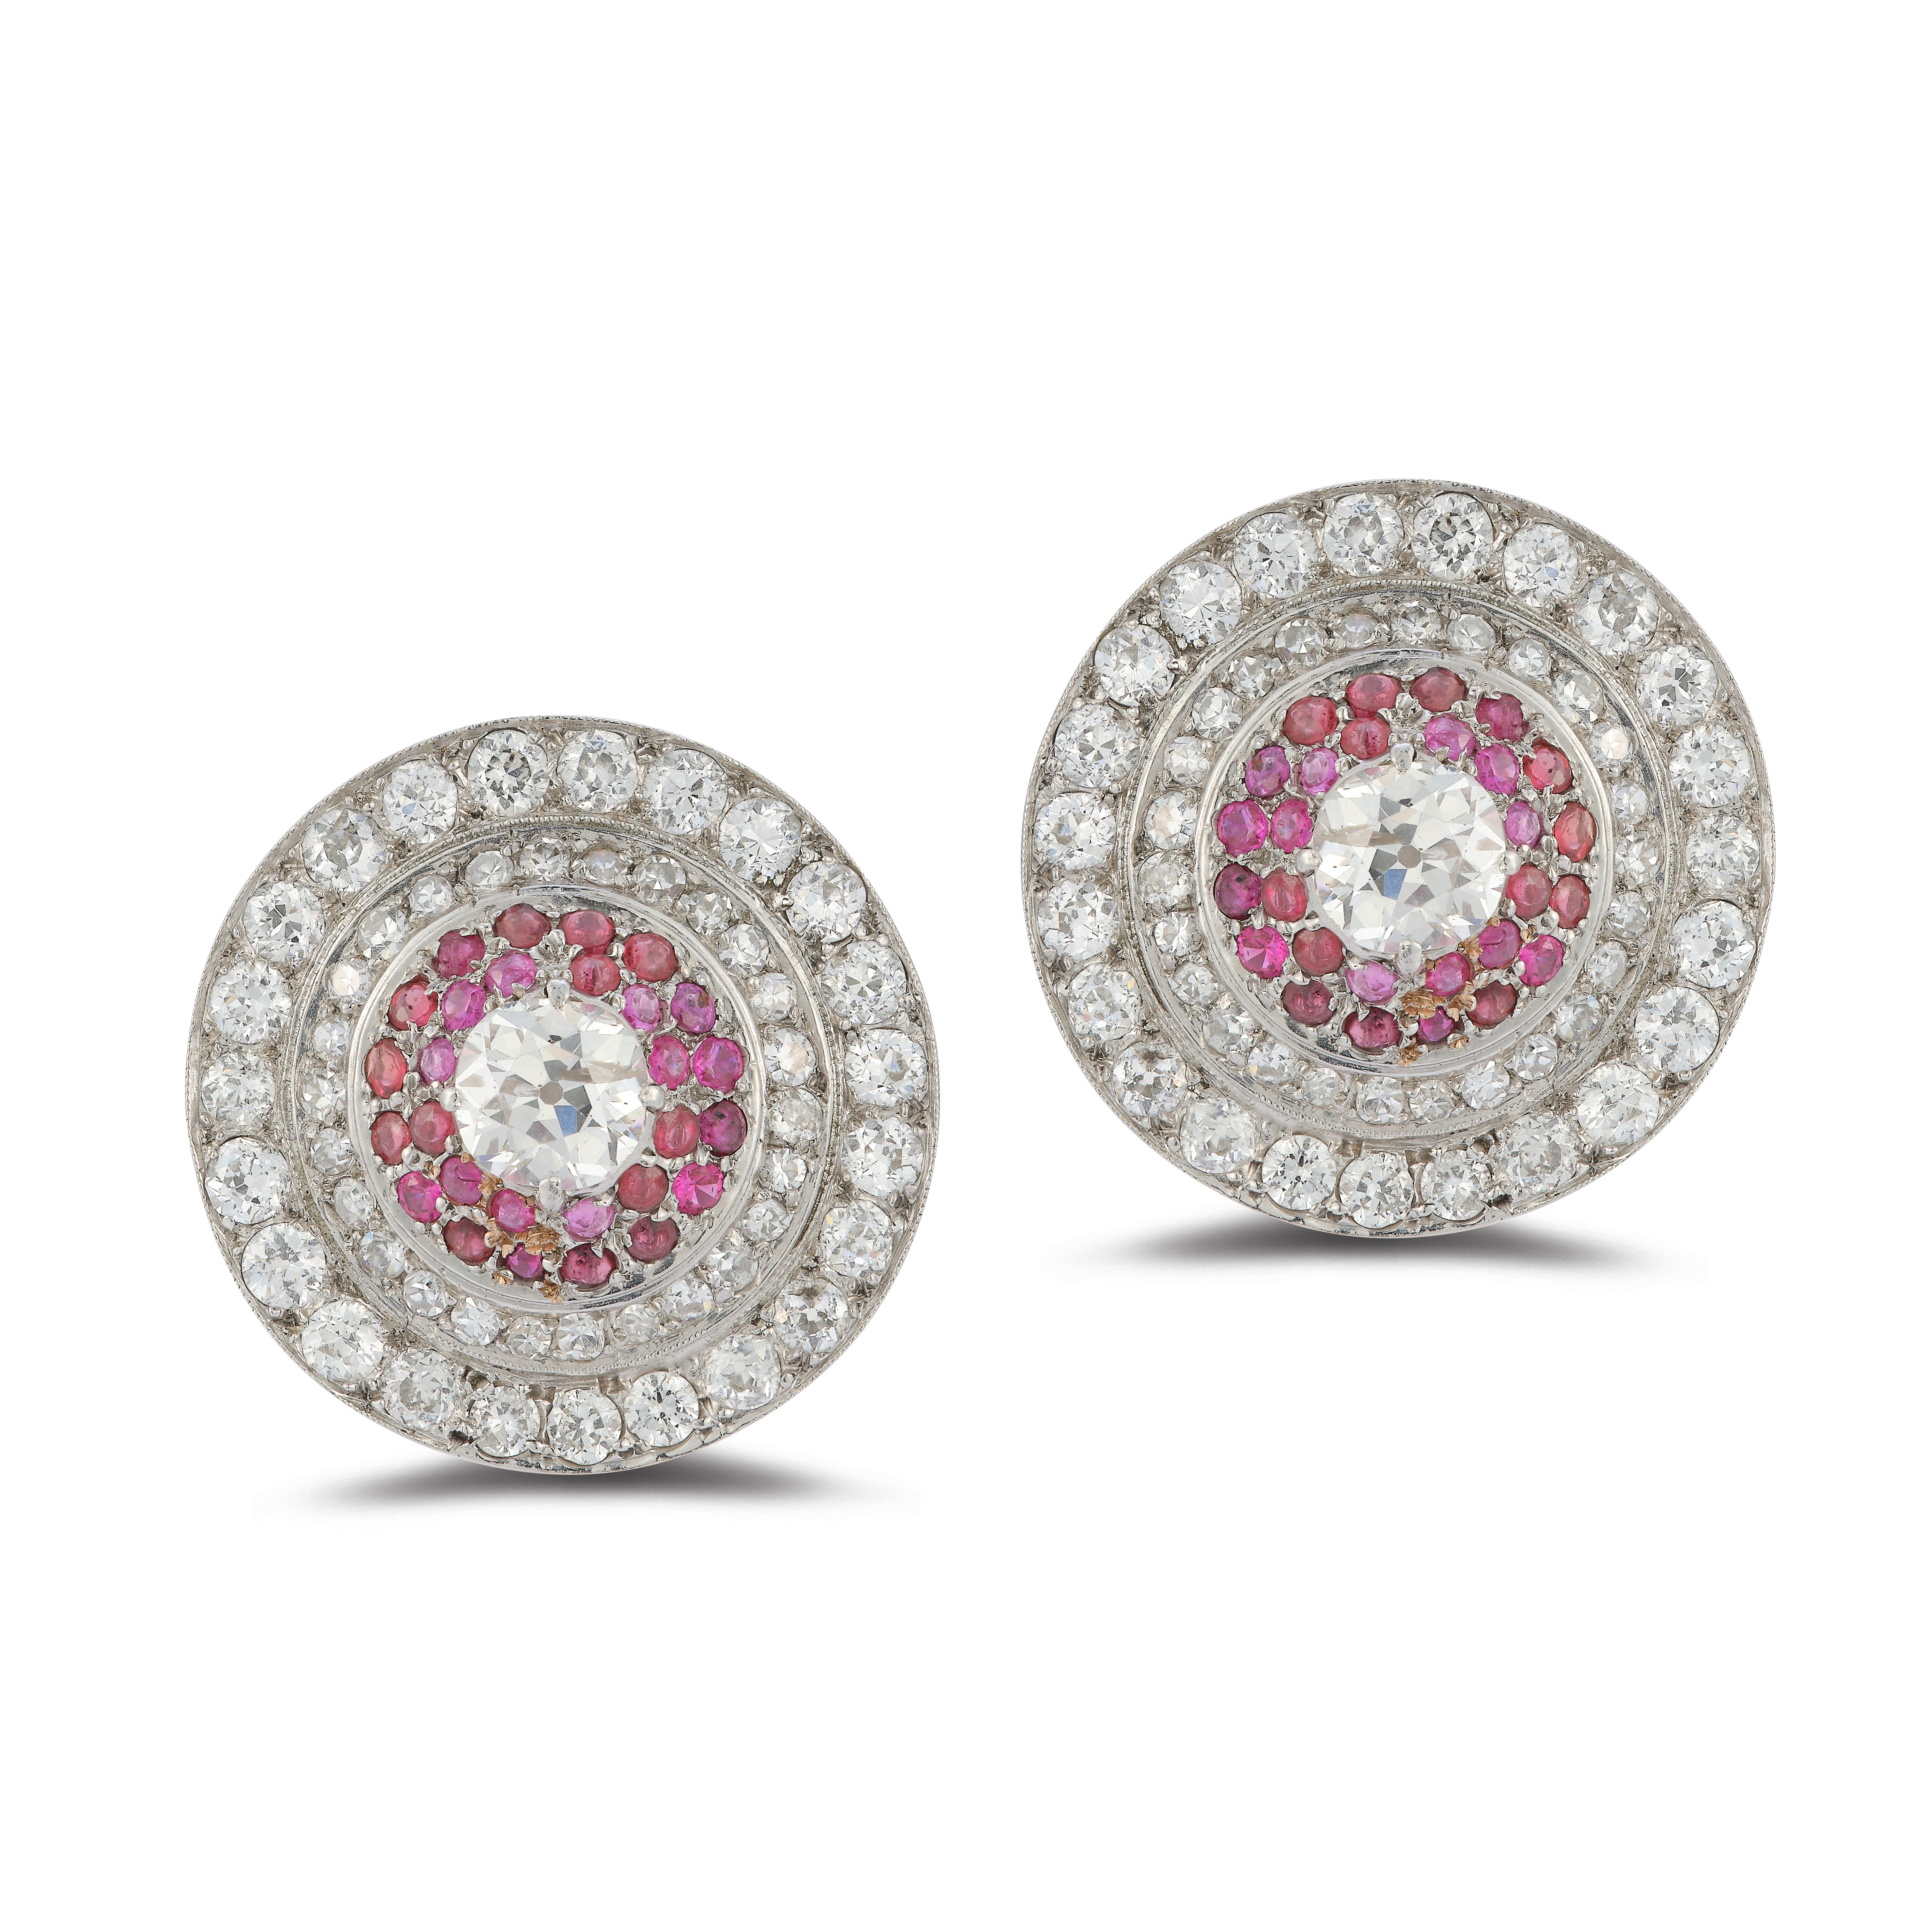 Diamond and Ruby Earclips

Two center round diamonds approx 2.75 ct
Remaining diamonds weigh approx 6.50 cts
Ruby approx 2.10 ct
18 karat white gold